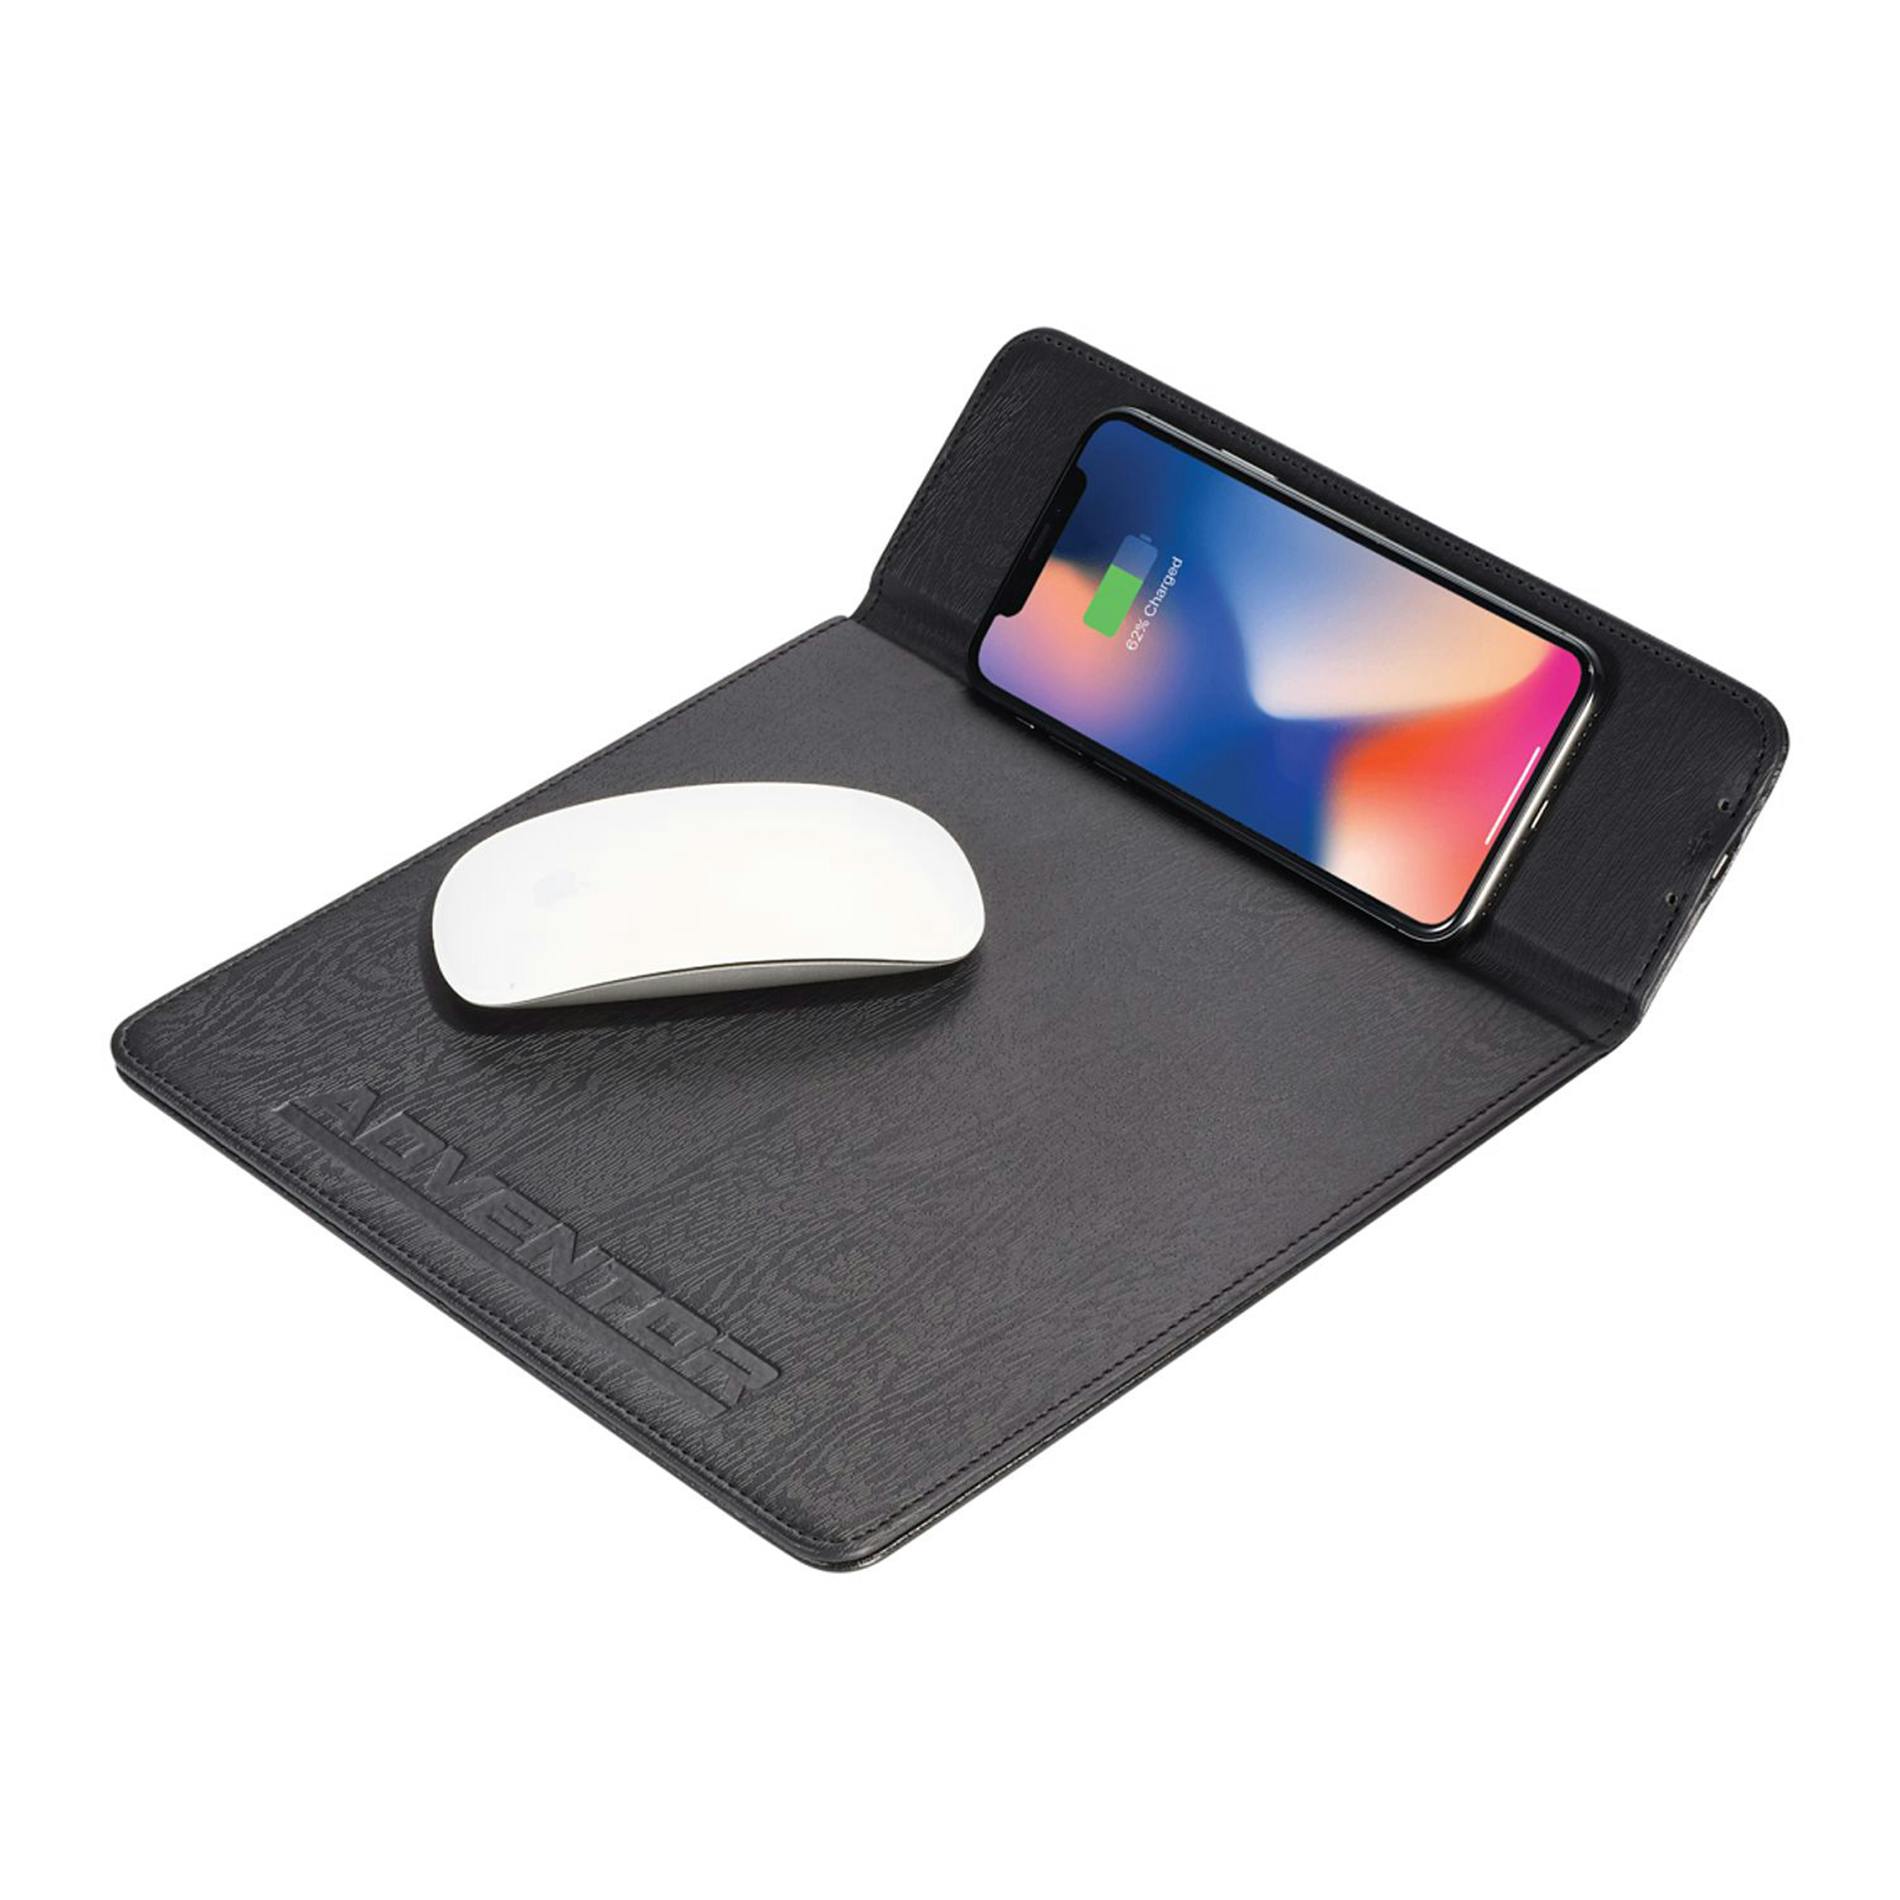 Wireless Charging Mouse Pad - additional Image 4